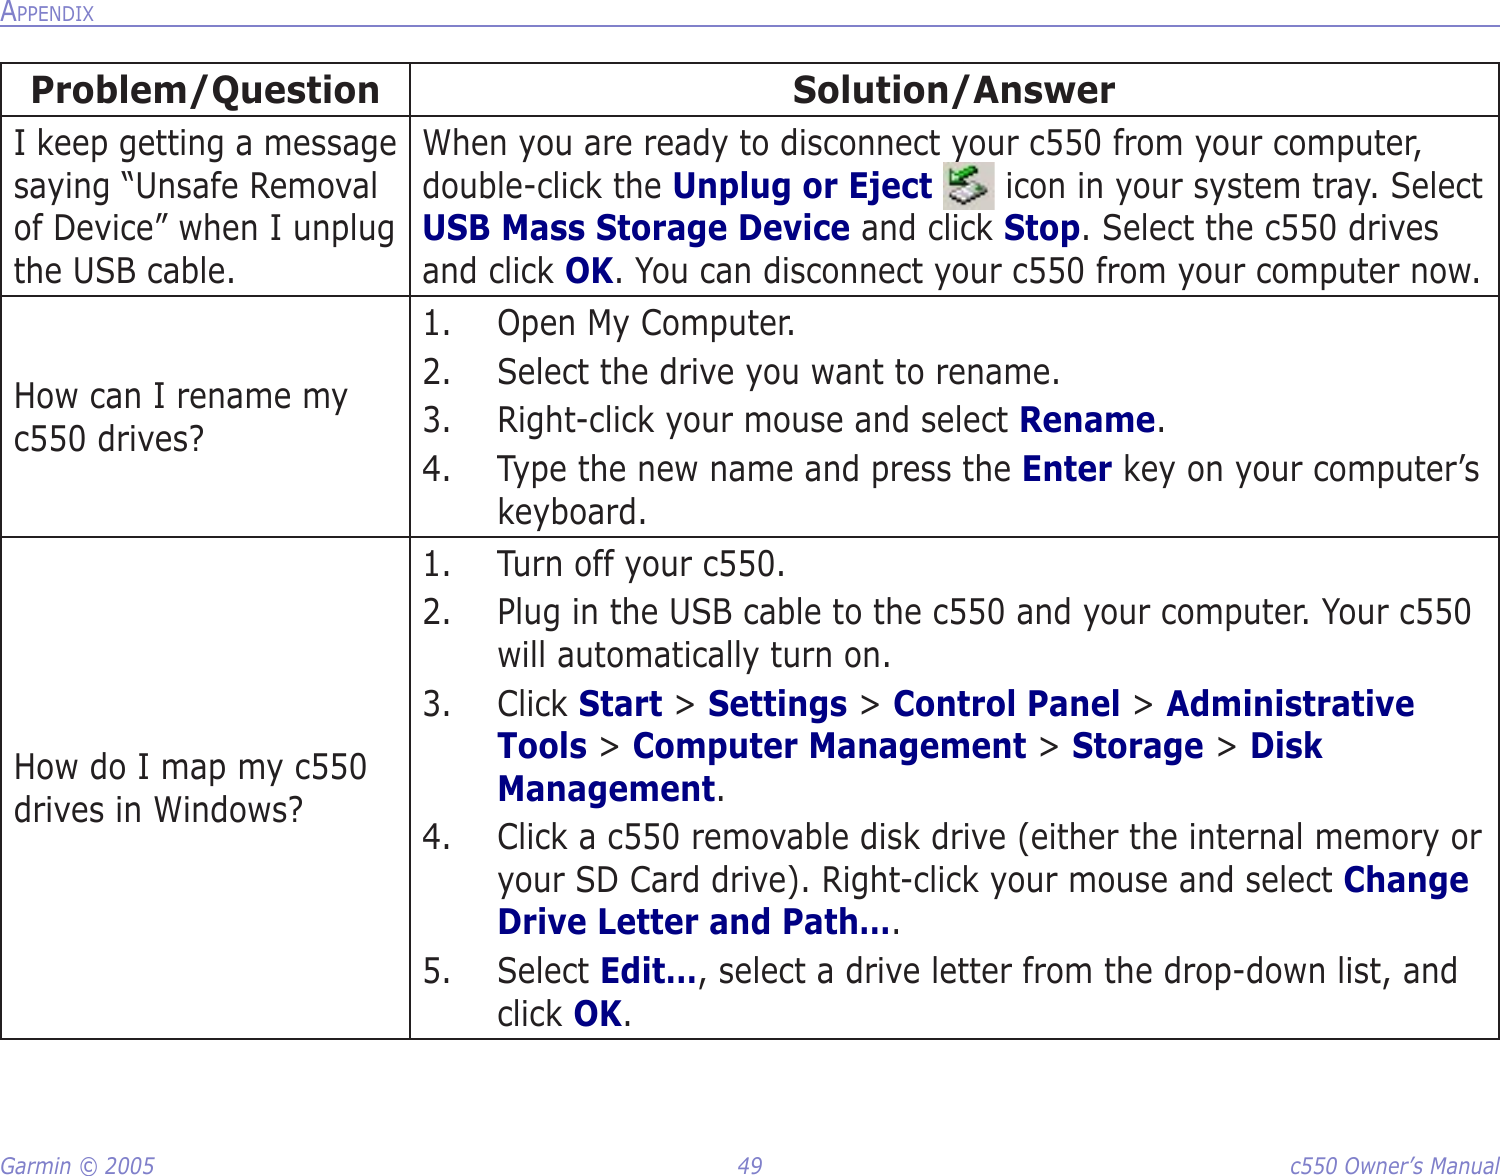 Garmin © 2005  49  c550 Owner’s ManualAPPENDIXProblem/Question Solution/AnswerI keep getting a message saying “Unsafe Removal of Device” when I unplug the USB cable.When you are ready to disconnect your c550 from your computer, double-click the Unplug or Eject   icon in your system tray. Select USB Mass Storage Device and click Stop. Select the c550 drives and click OK. You can disconnect your c550 from your computer now. How can I rename my c550 drives?1.  Open My Computer. 2.  Select the drive you want to rename. 3.  Right-click your mouse and select Rename. 4.  Type the new name and press the Enter key on your computer’s keyboard. How do I map my c550 drives in Windows?1.  Turn off your c550. 2.  Plug in the USB cable to the c550 and your computer. Your c550 will automatically turn on. 3.  Click Start &gt; Settings &gt; Control Panel &gt; Administrative Tools &gt; Computer Management &gt; Storage &gt; Disk Management. 4.  Click a c550 removable disk drive (either the internal memory or your SD Card drive). Right-click your mouse and select Change Drive Letter and Path….5.  Select Edit…, select a drive letter from the drop-down list, and click OK. 